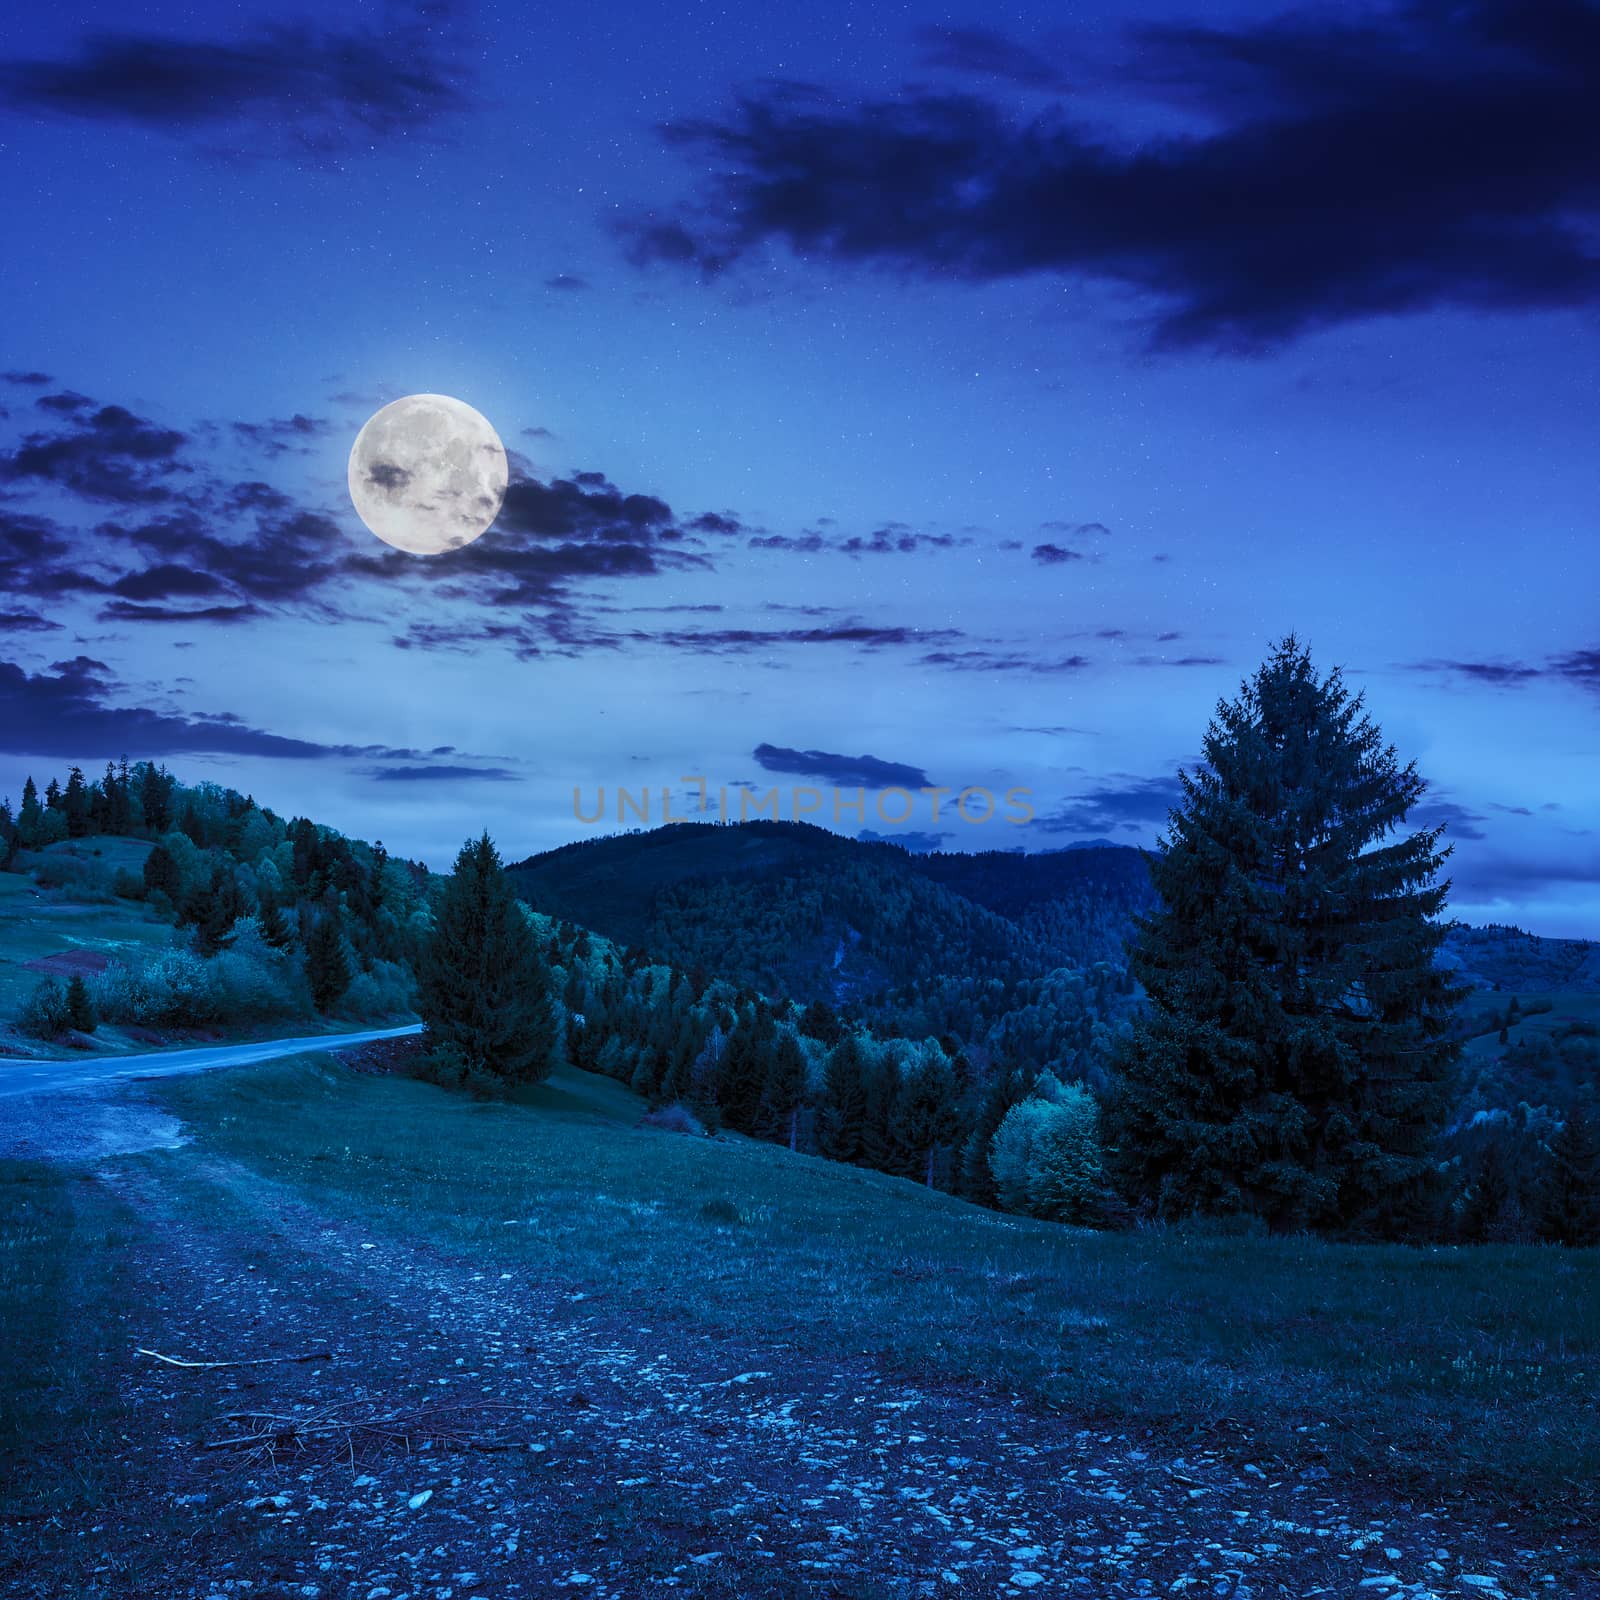 asphalt road going down the hill and up in to mountains, passes through the green shaded forest at night in moon light